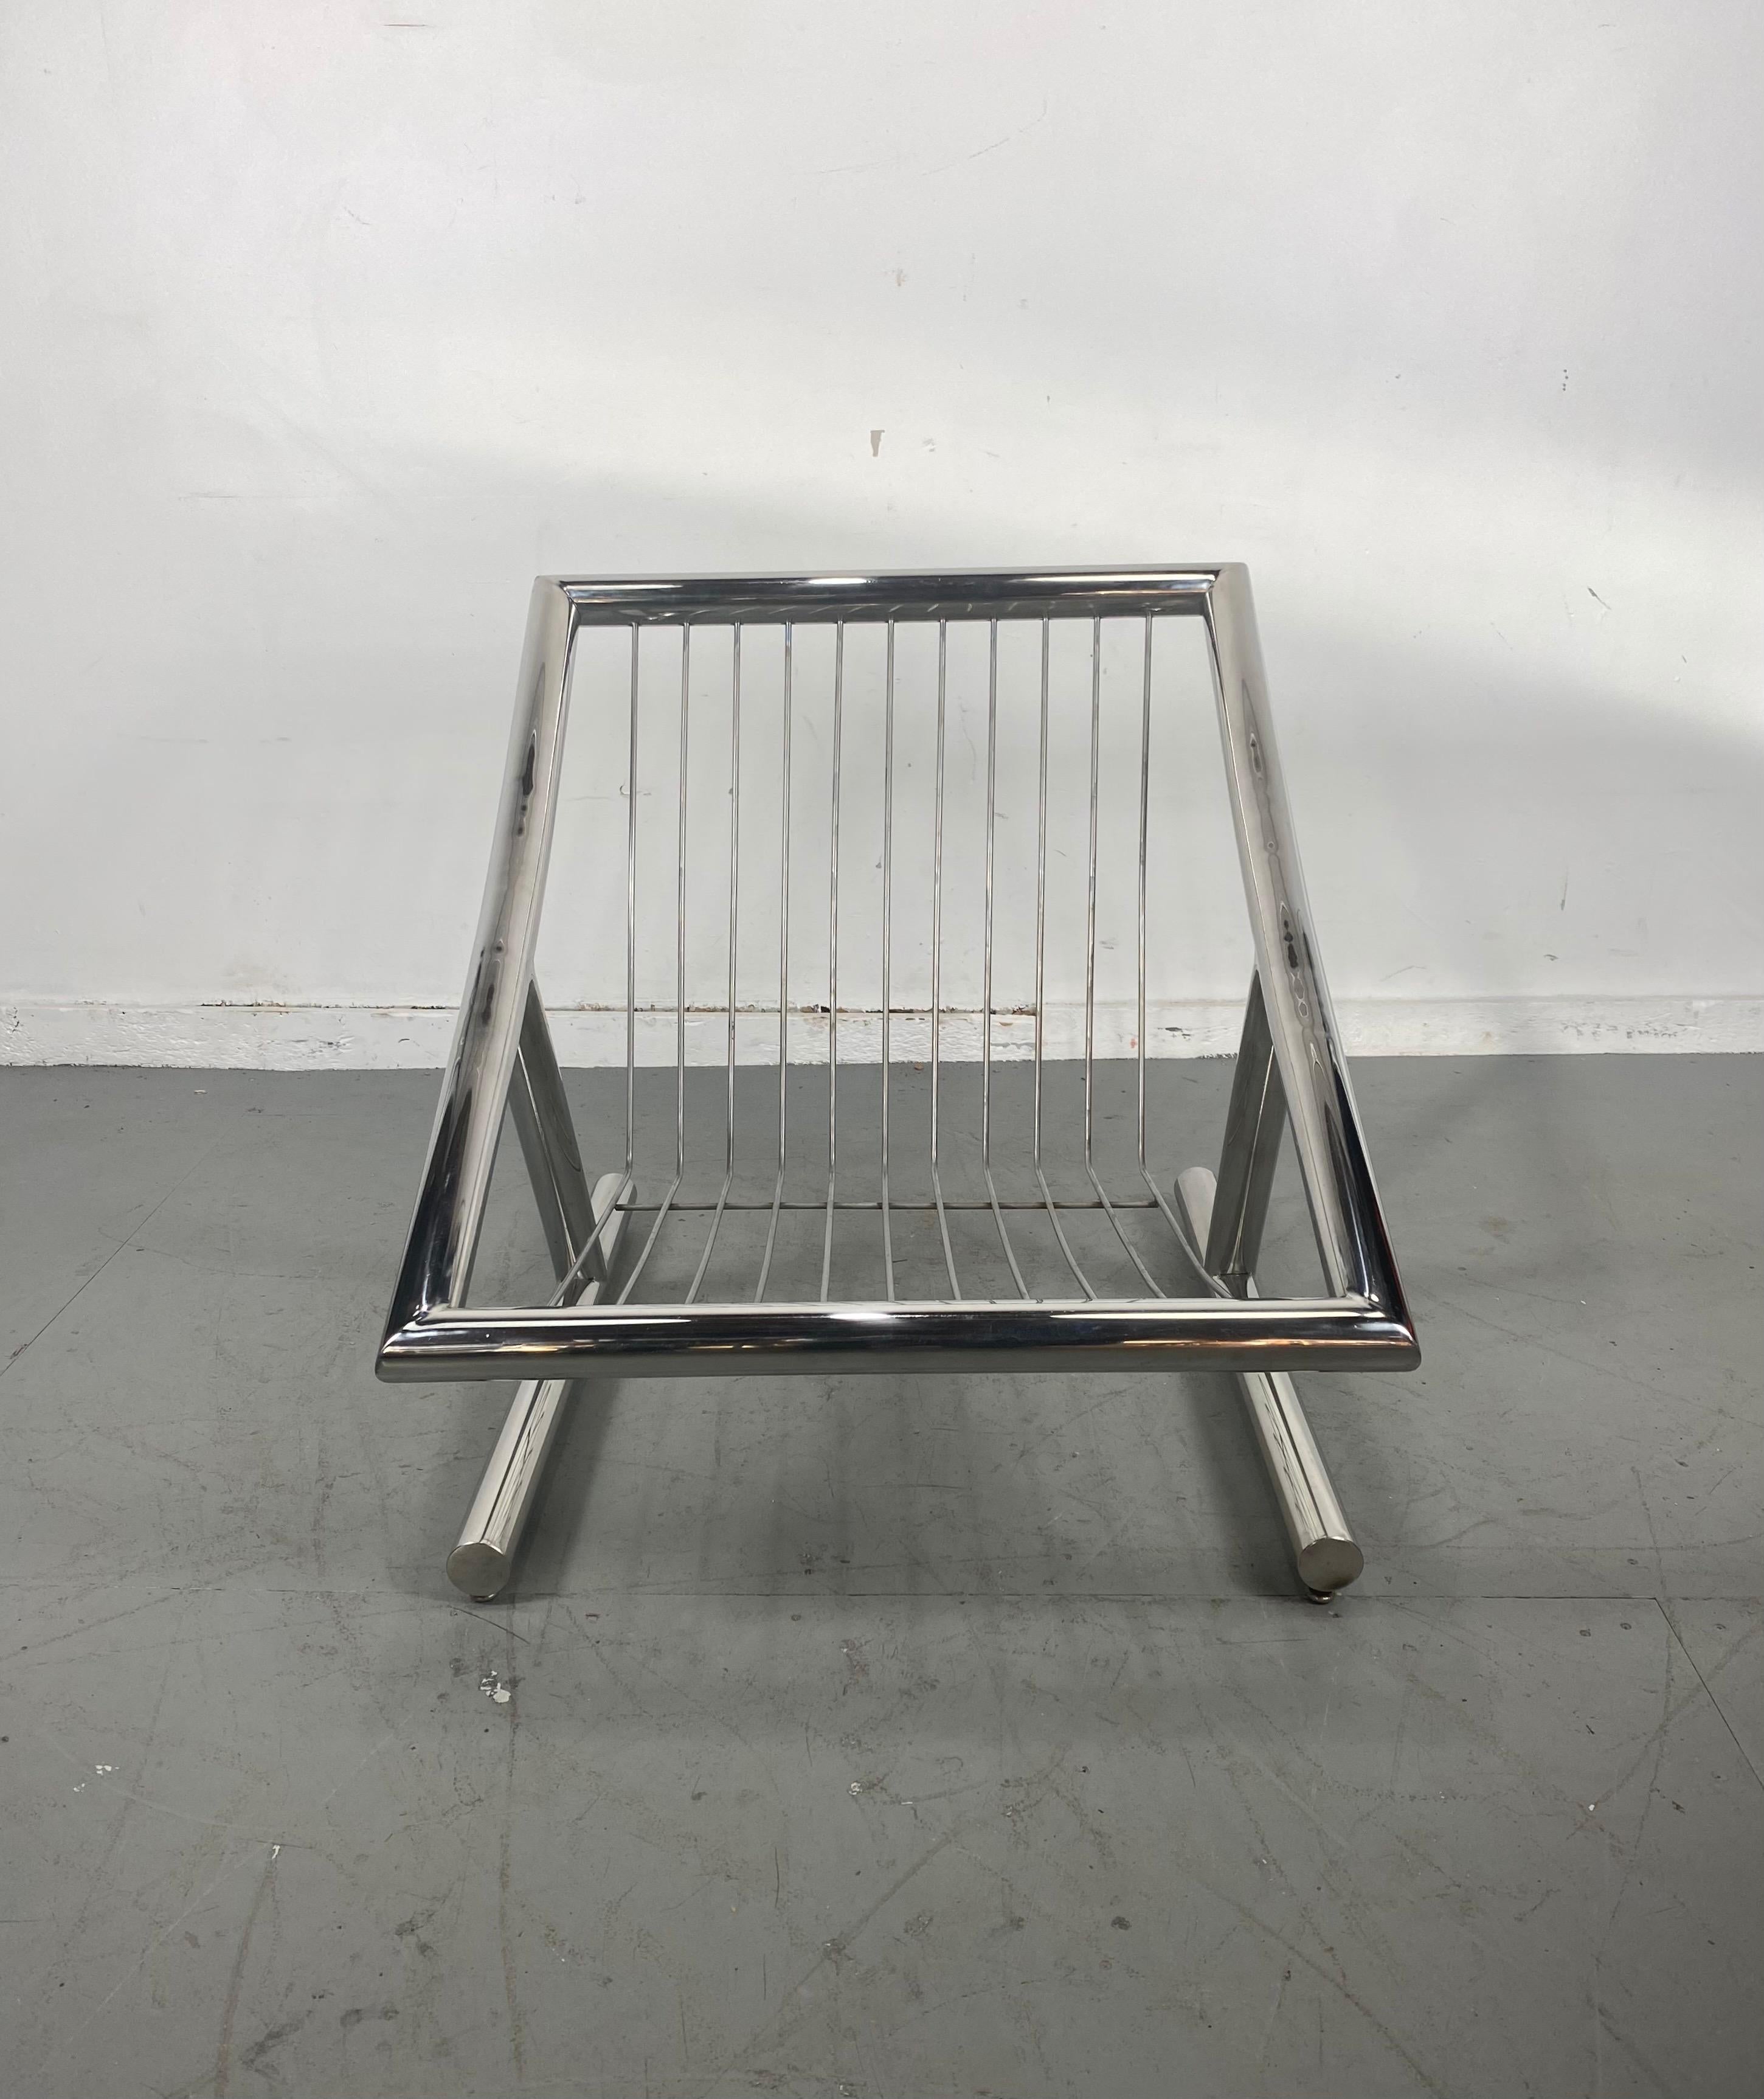 Rare Space Age, Modernist Chromed Steel Lounge Chair by Plato Ginello, Italy In Excellent Condition For Sale In Buffalo, NY